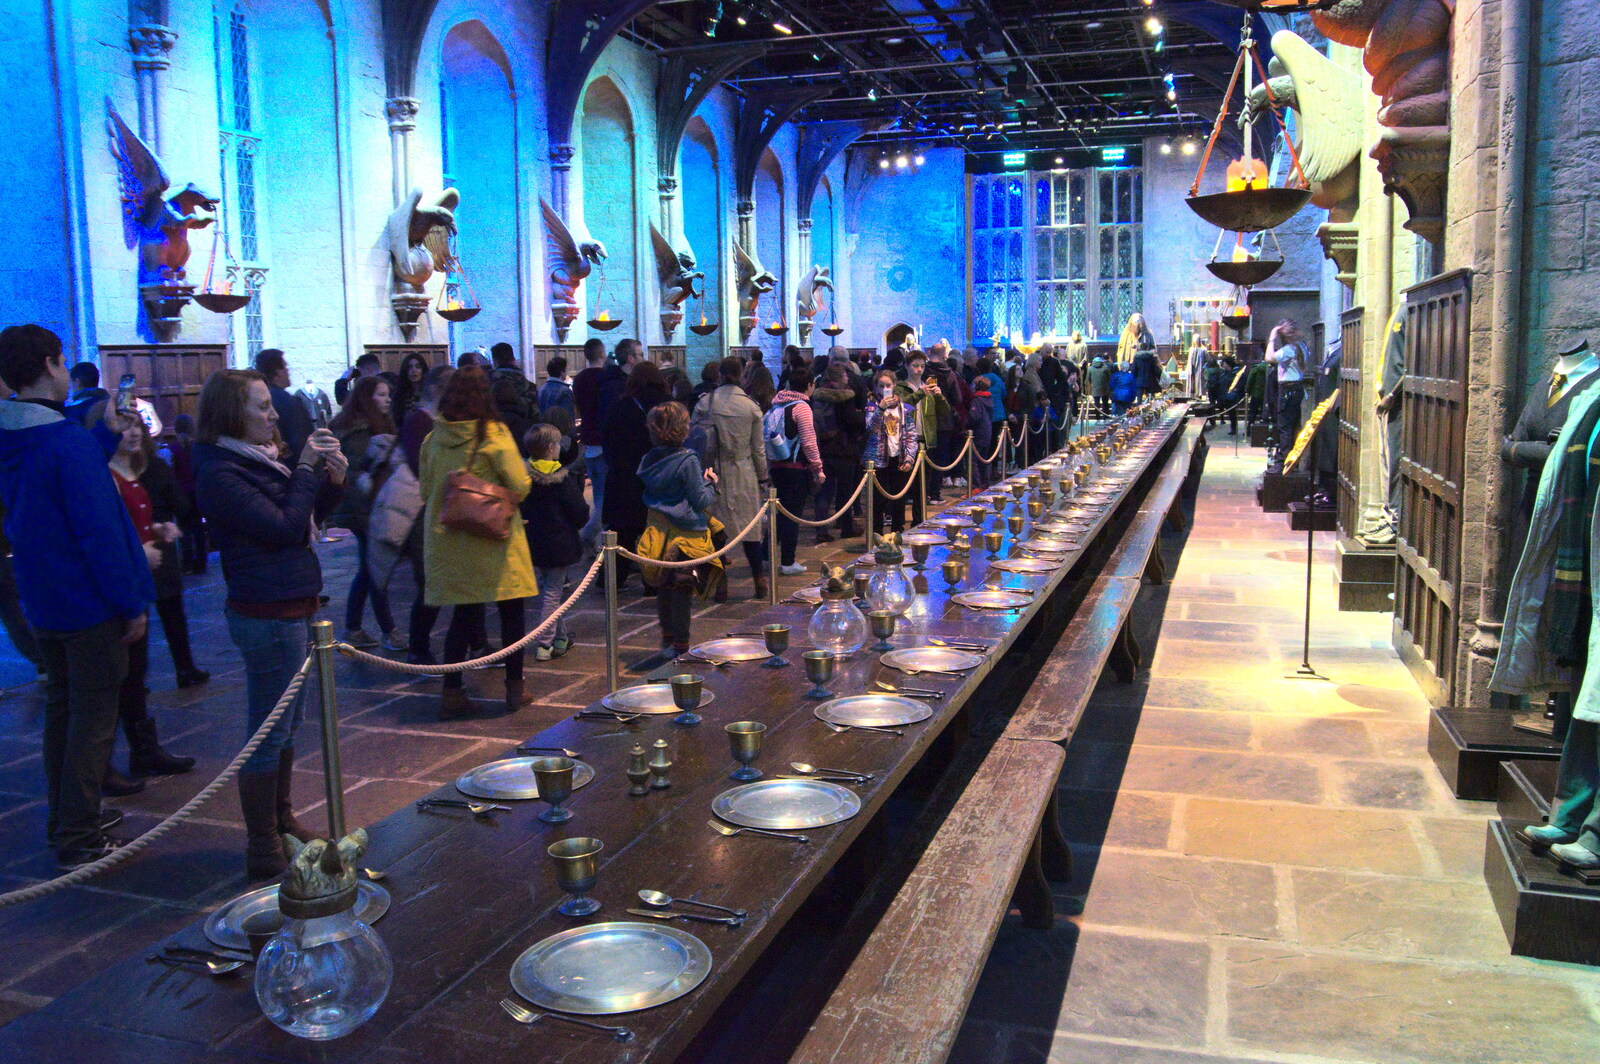 Hogwart's Great Hall from A Trip to Harry Potter World, Leavesden, Hertfordshire - 16th February 2020